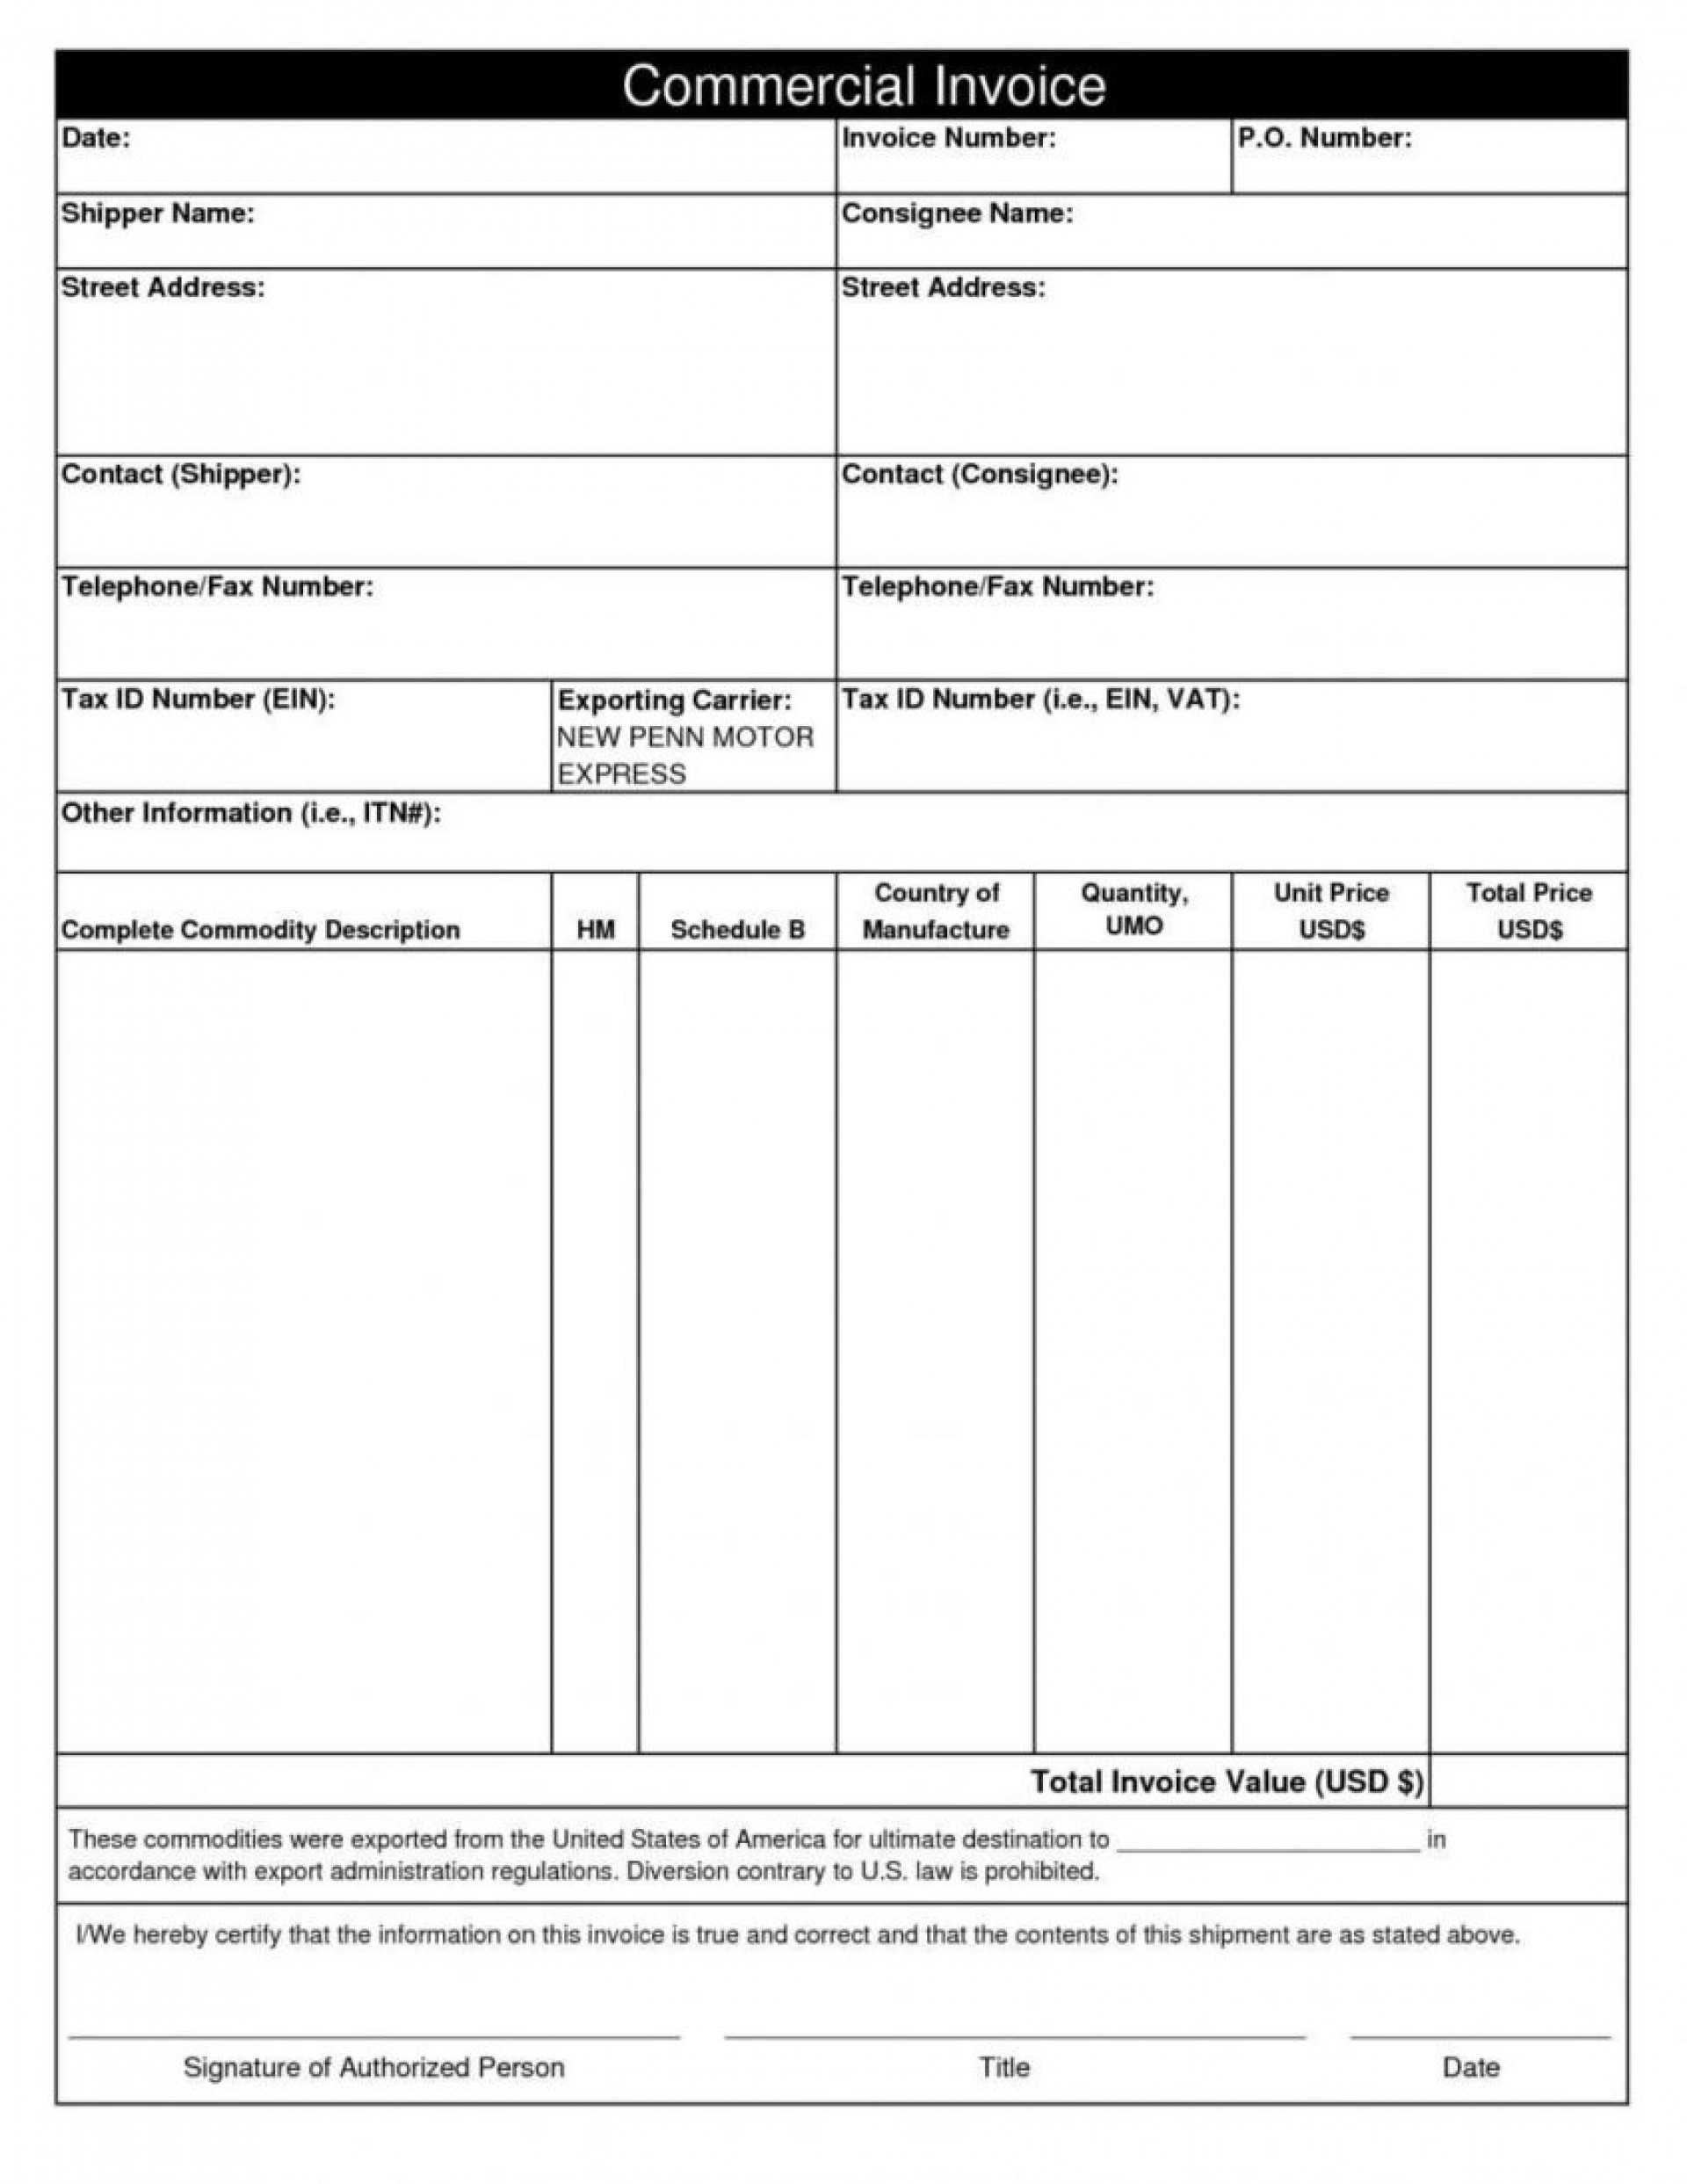 C82 Commercial Invoice Template Canada | Wiring Library Inside Customs Commercial Invoice Template